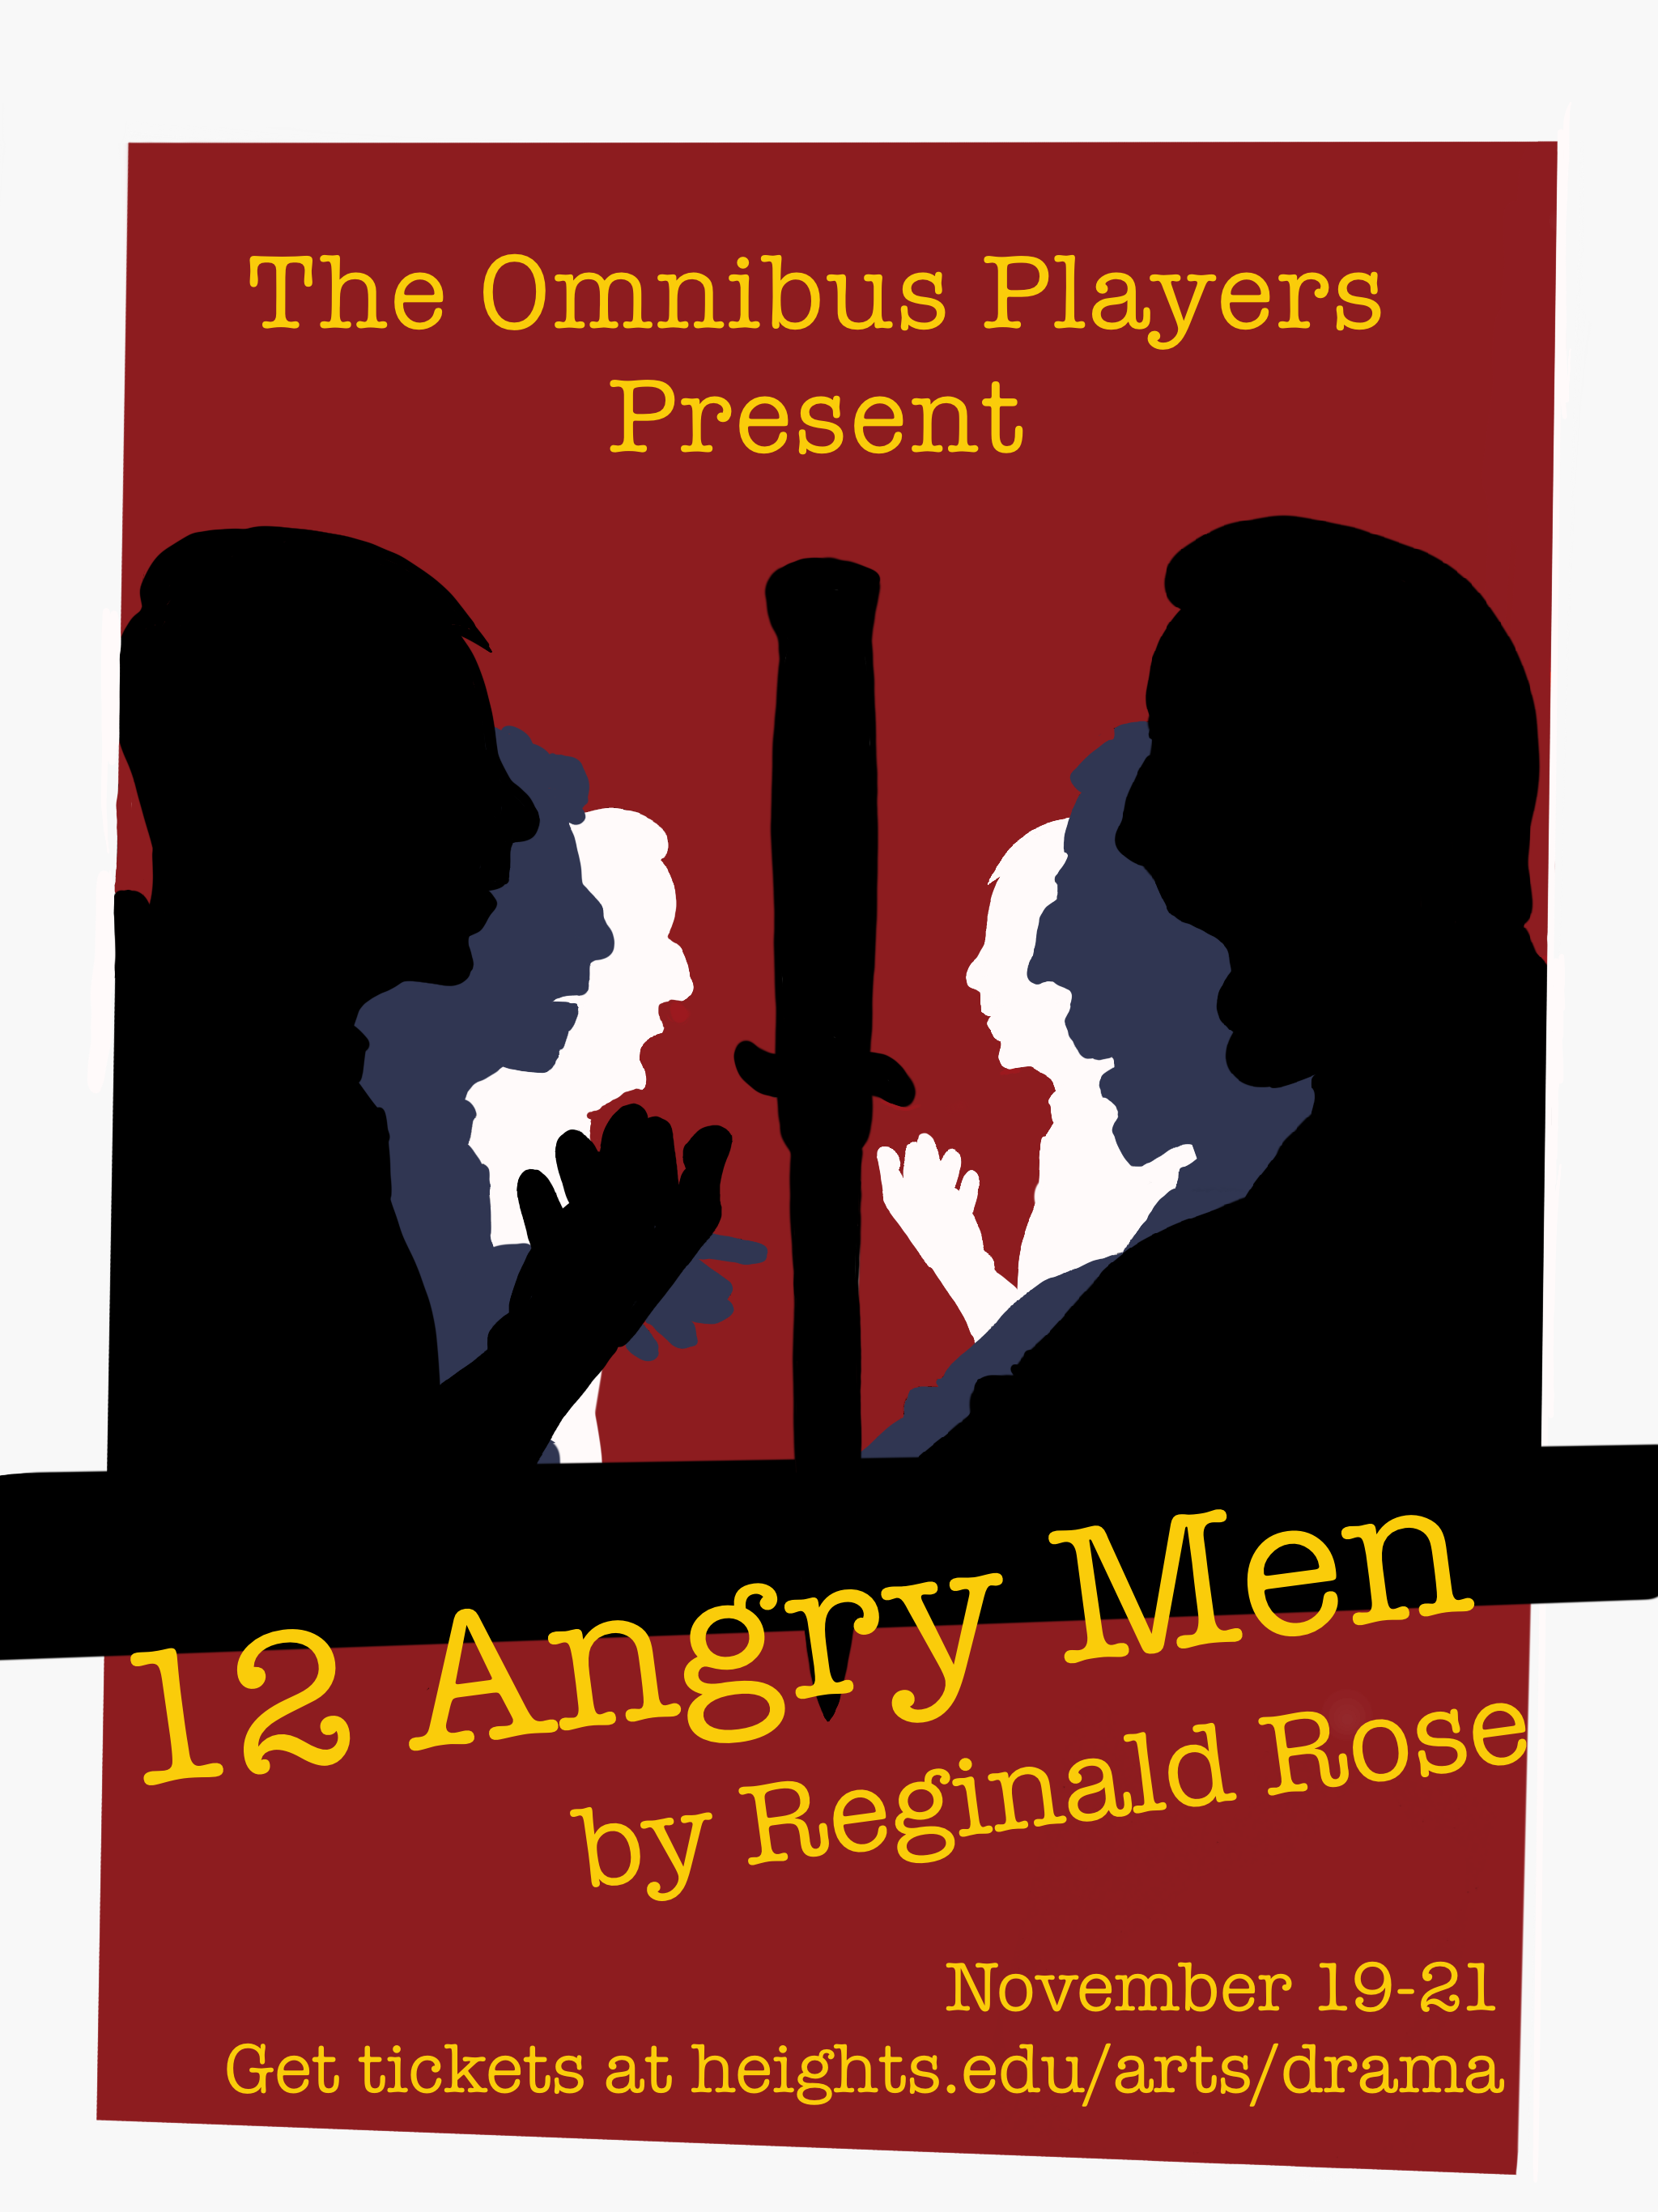 who wrote 12 angry men